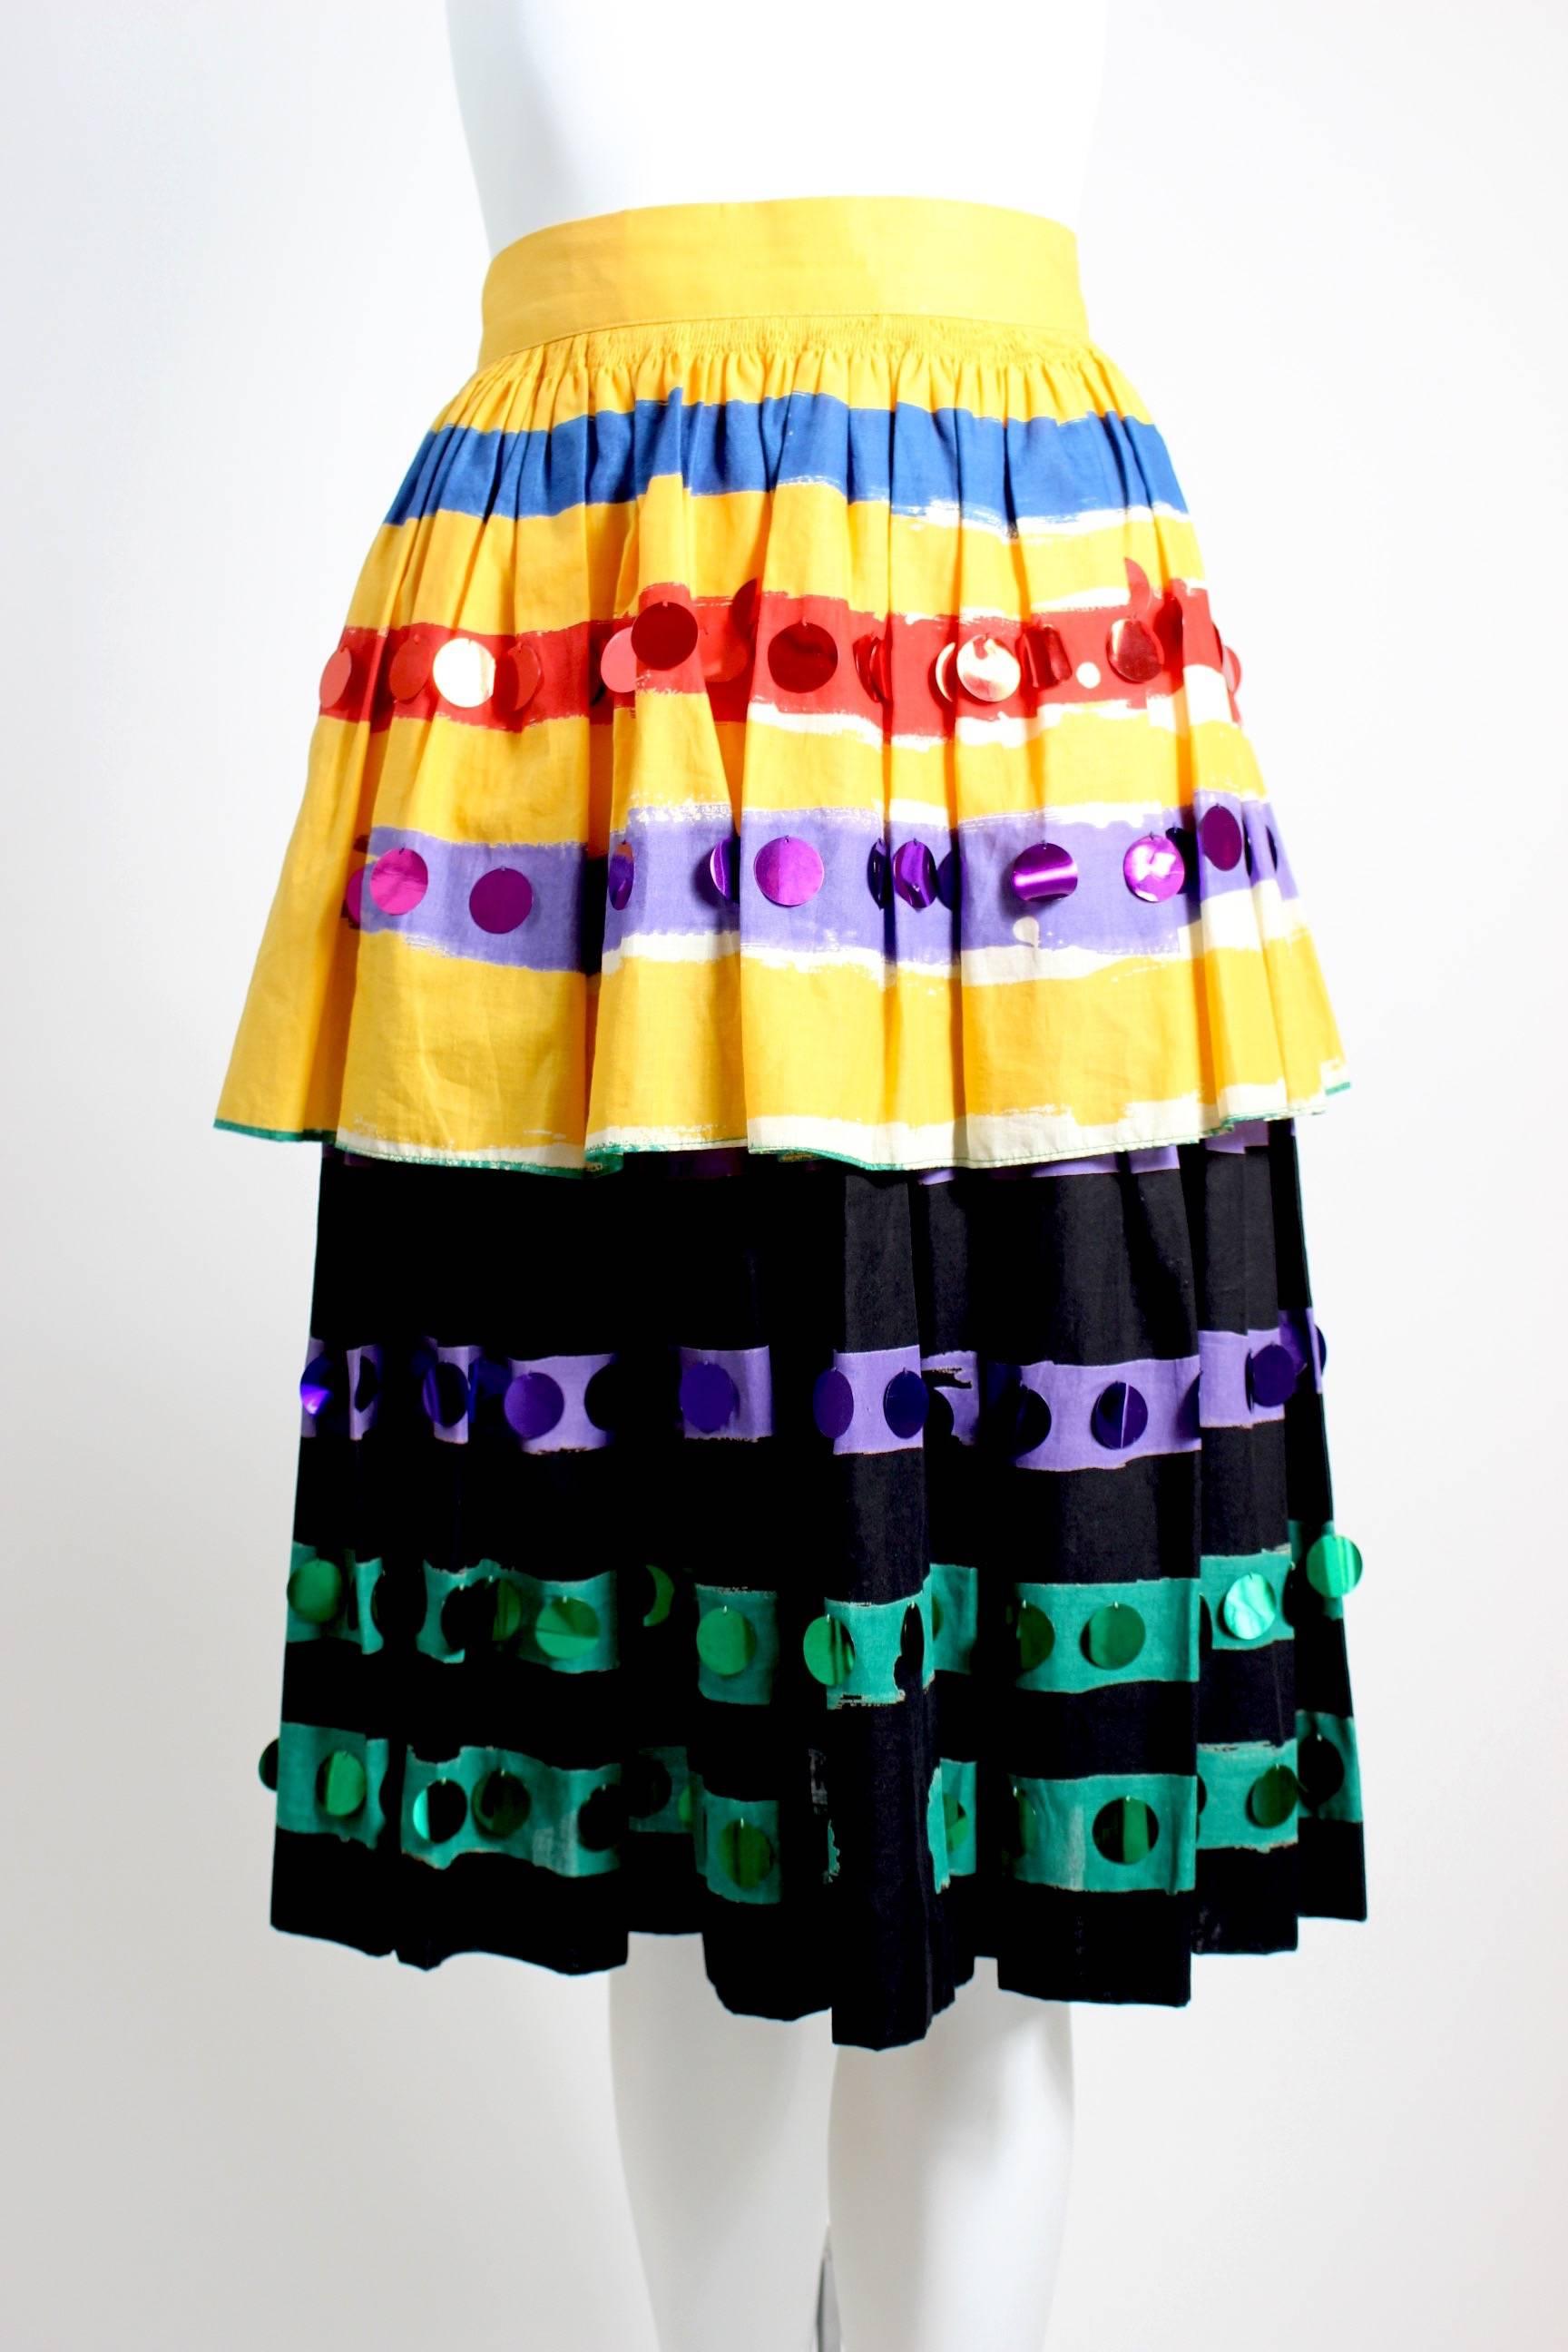 A fabulous and fun Michaele Vollbrach  1980s skirt. Done in a soft cotton the top layer is a bright canary yellow  with colorful brush strokes in blue, red and purple, the bottom layer is black with purple and green strokes. Large colorful metallic